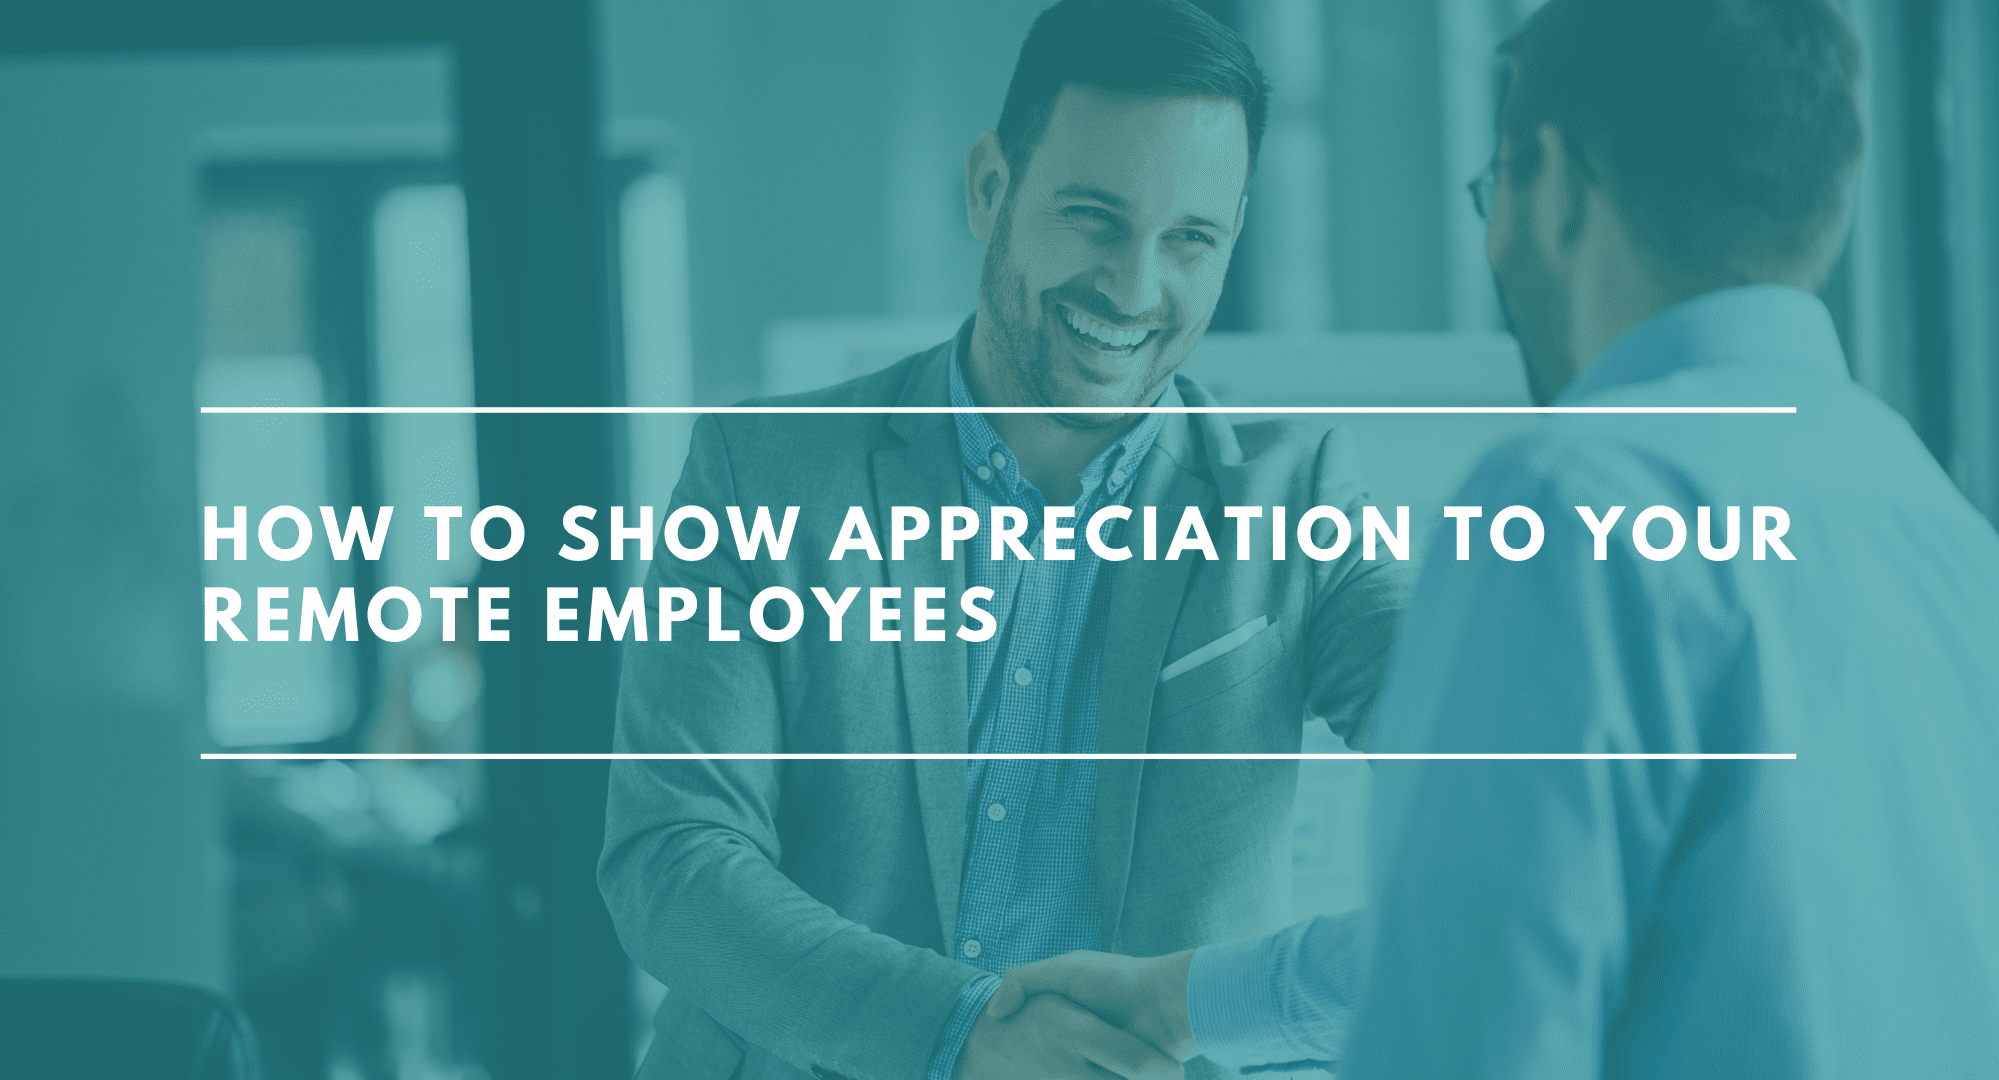 How To Appreciate Remote Employees. How To Appreciate Remote Employees During COVID 19. How to show appreciation to remote employees. Remote ways to show appreciation to your work from home employees.